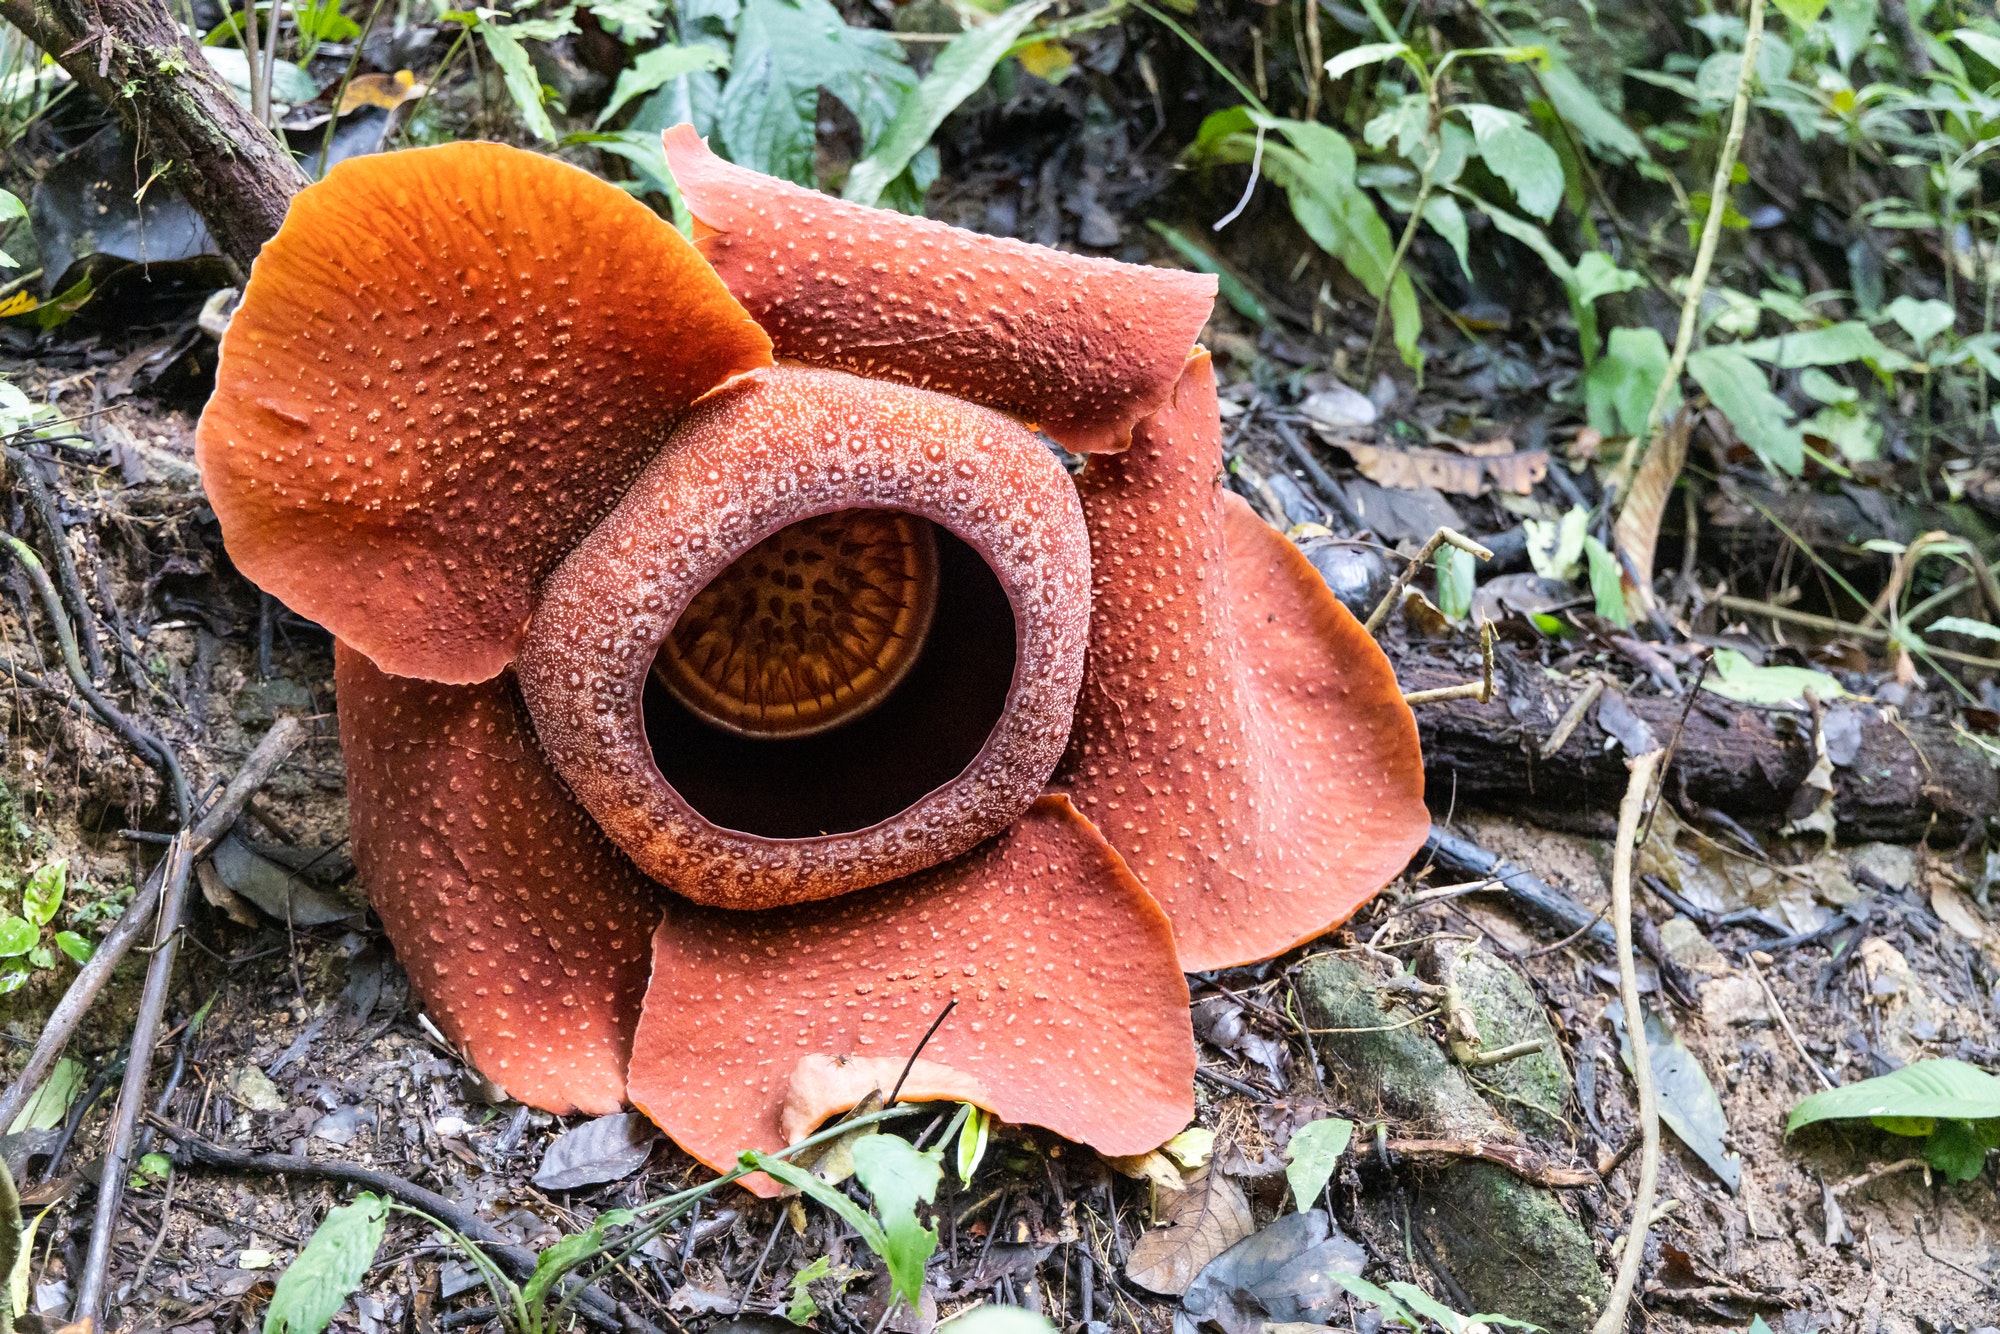 Rafflesia is a genus of parasitic flowering plants in the family Rafflesiaceae. It is the largest